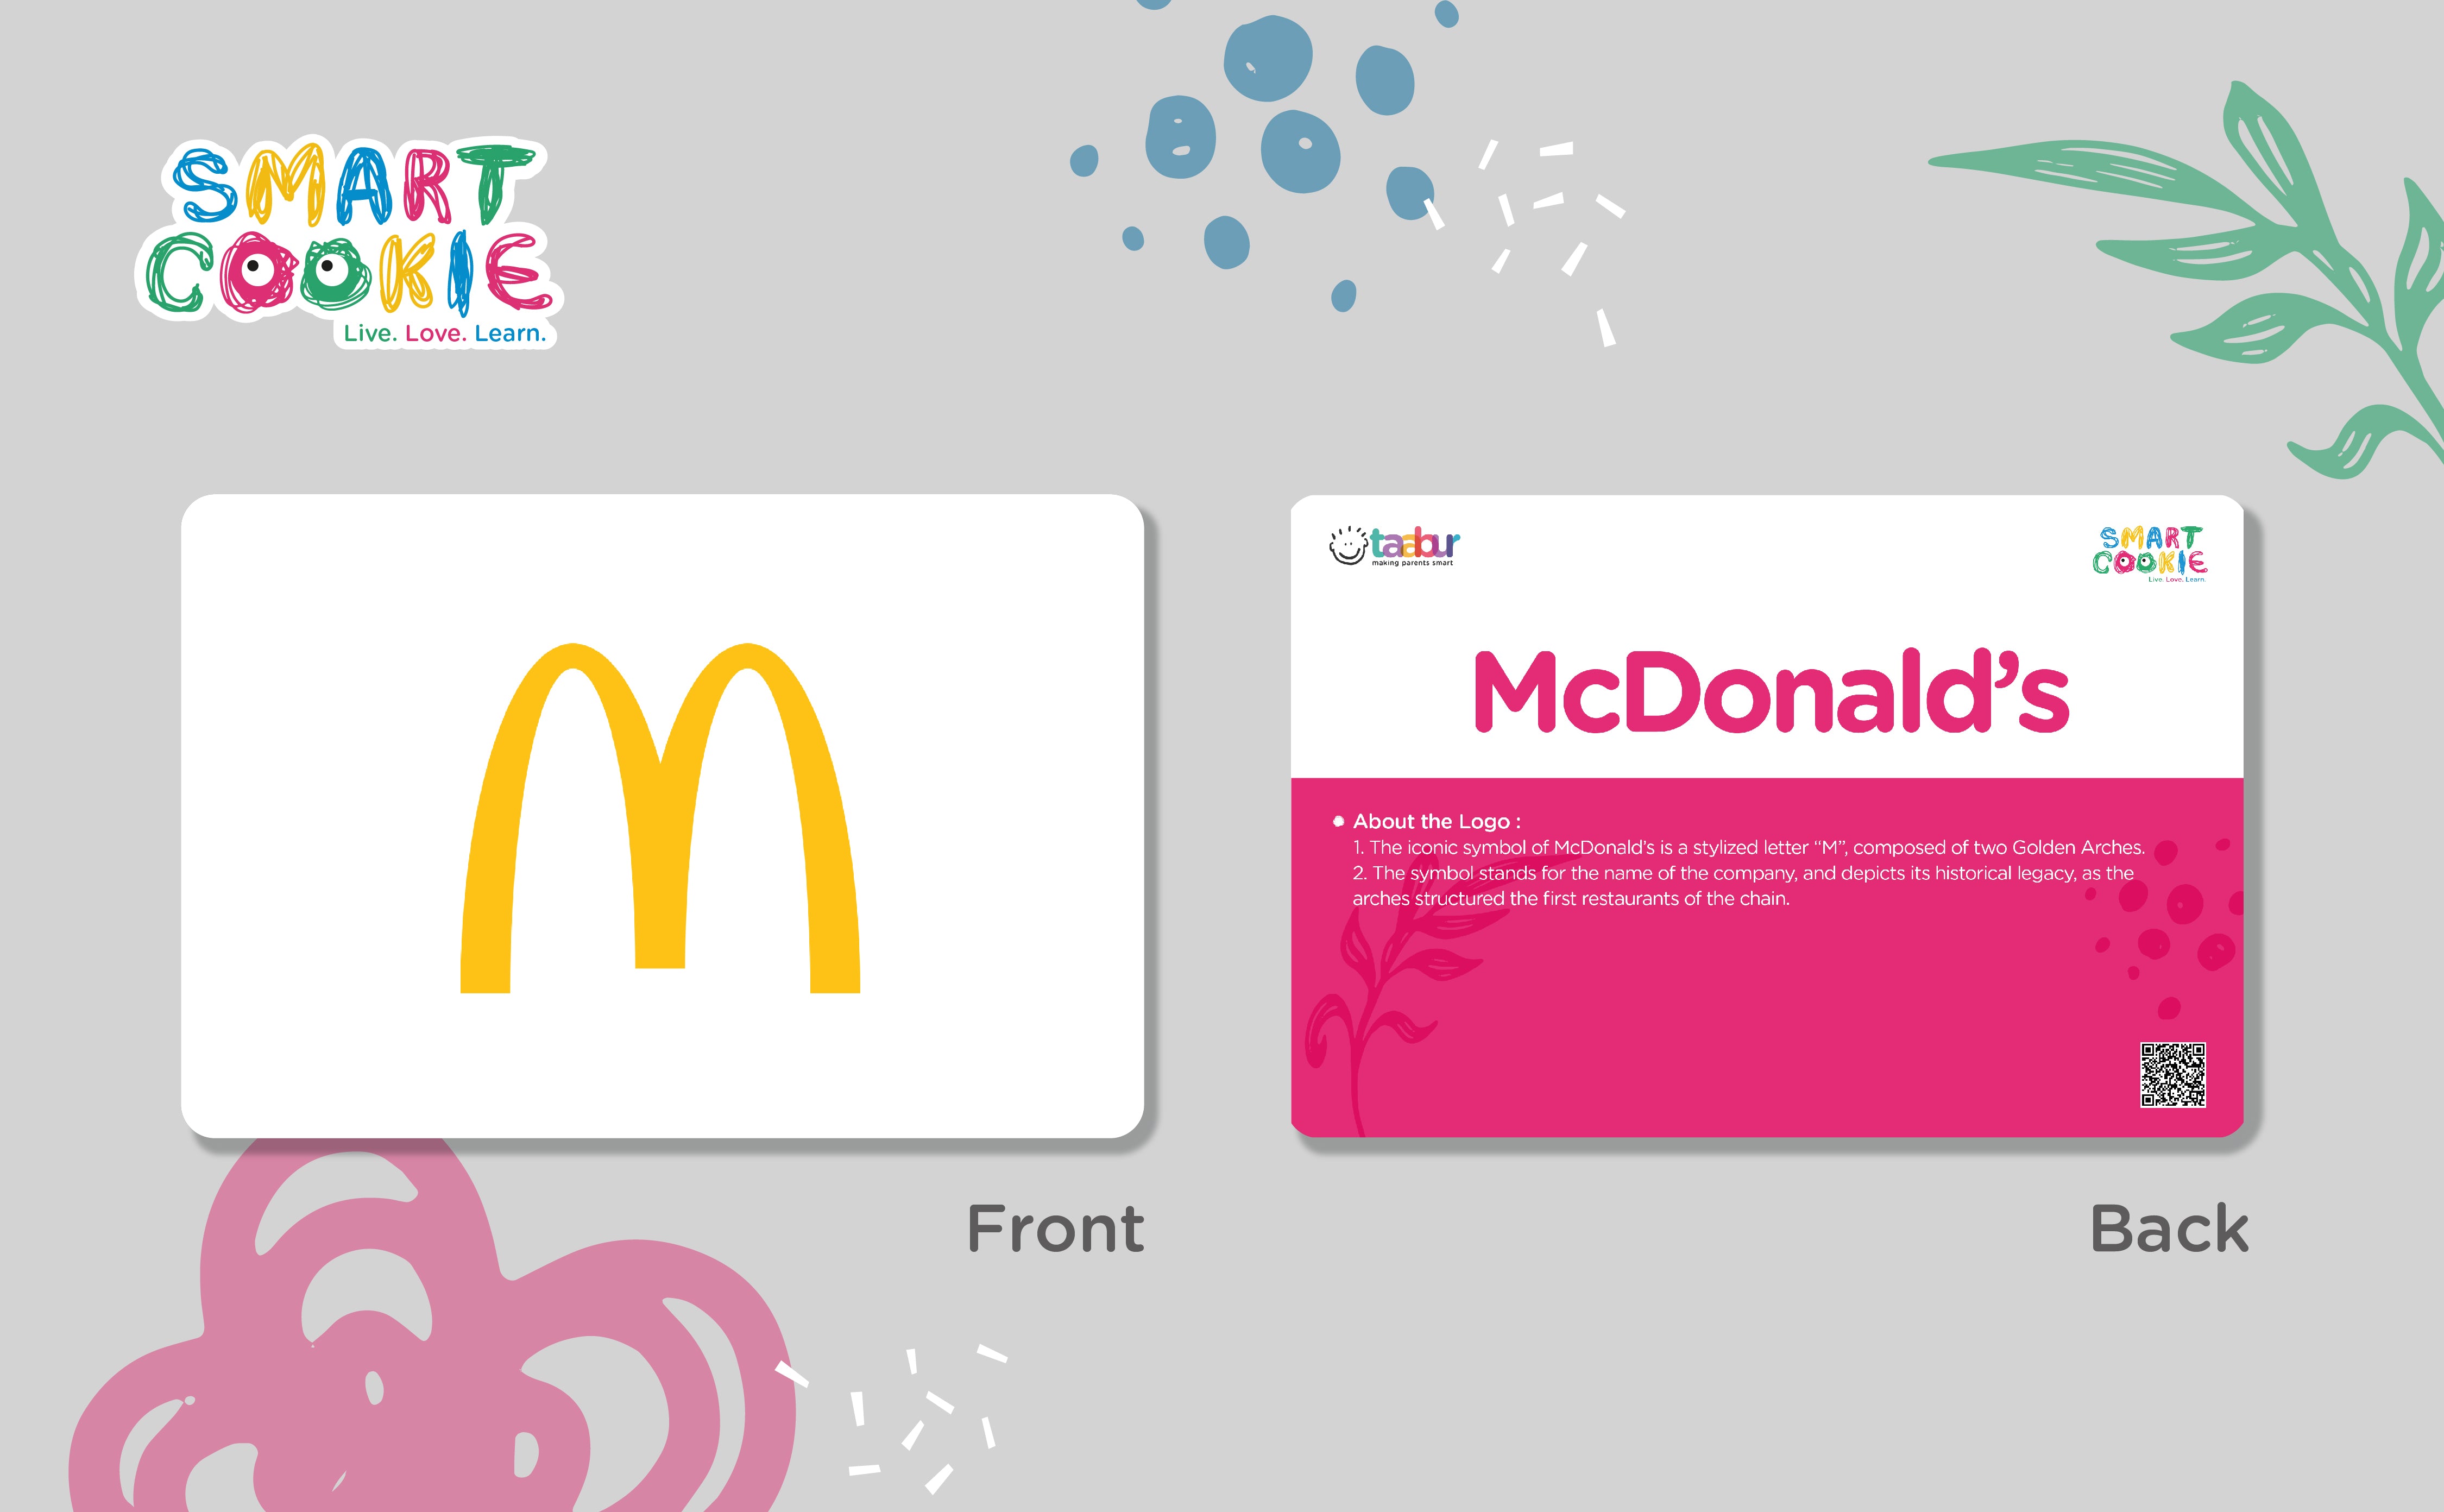 International Brand Logos - Interactive Flash Cards for Children (36 Cards) - for Kids Aged 4 to 6 Years Old